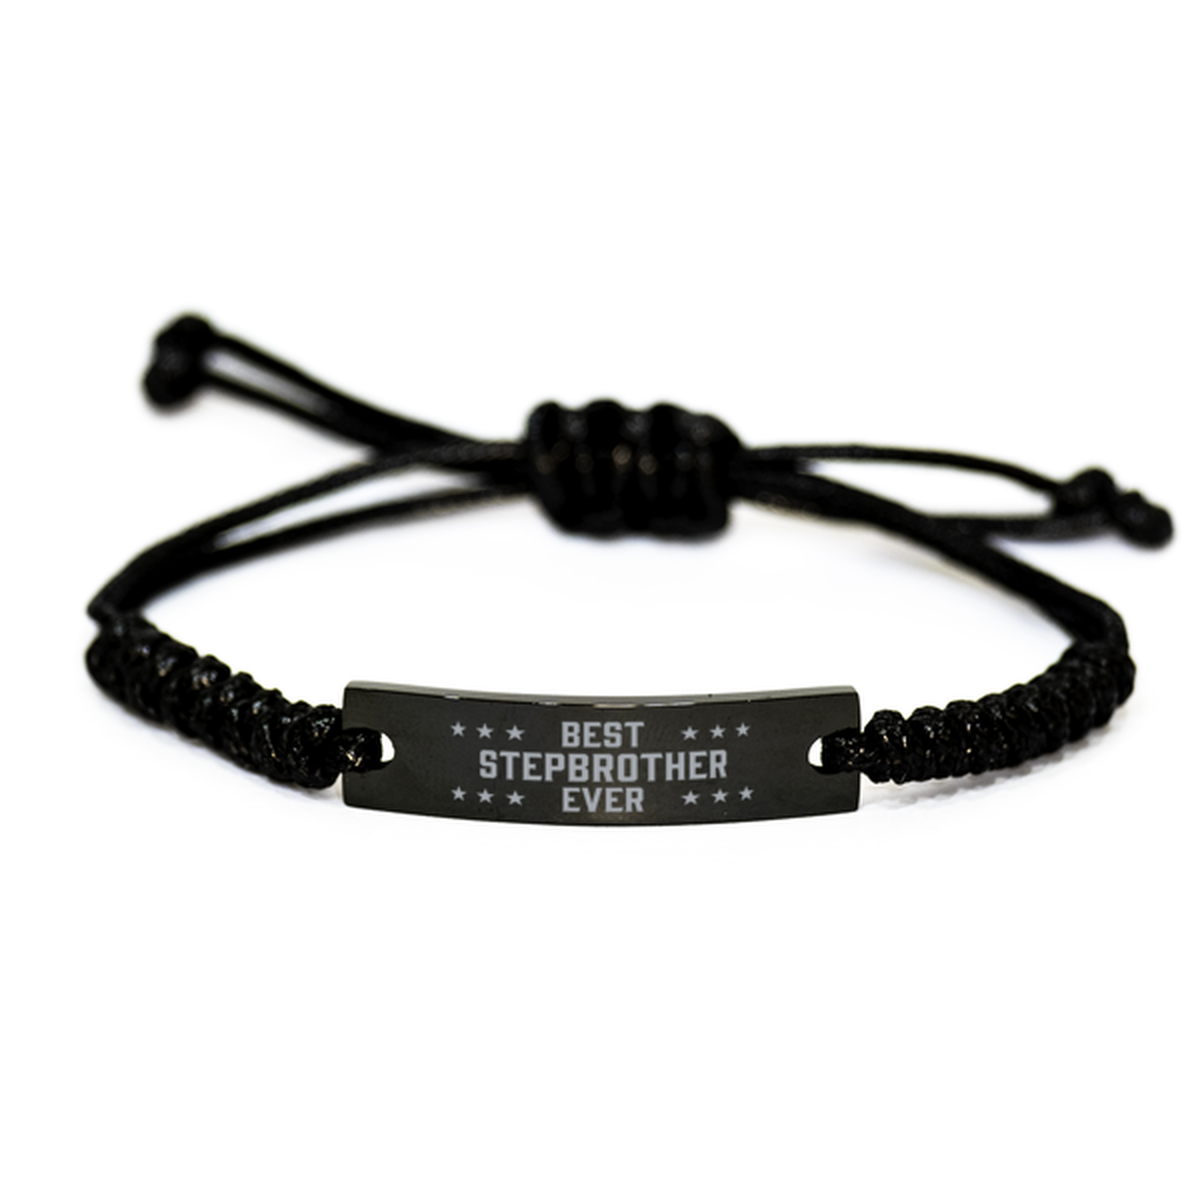 Best Stepbrother Ever Stepbrother Gifts, Funny Engraved Rope Bracelet For Stepbrother, Birthday Family Gifts For Men